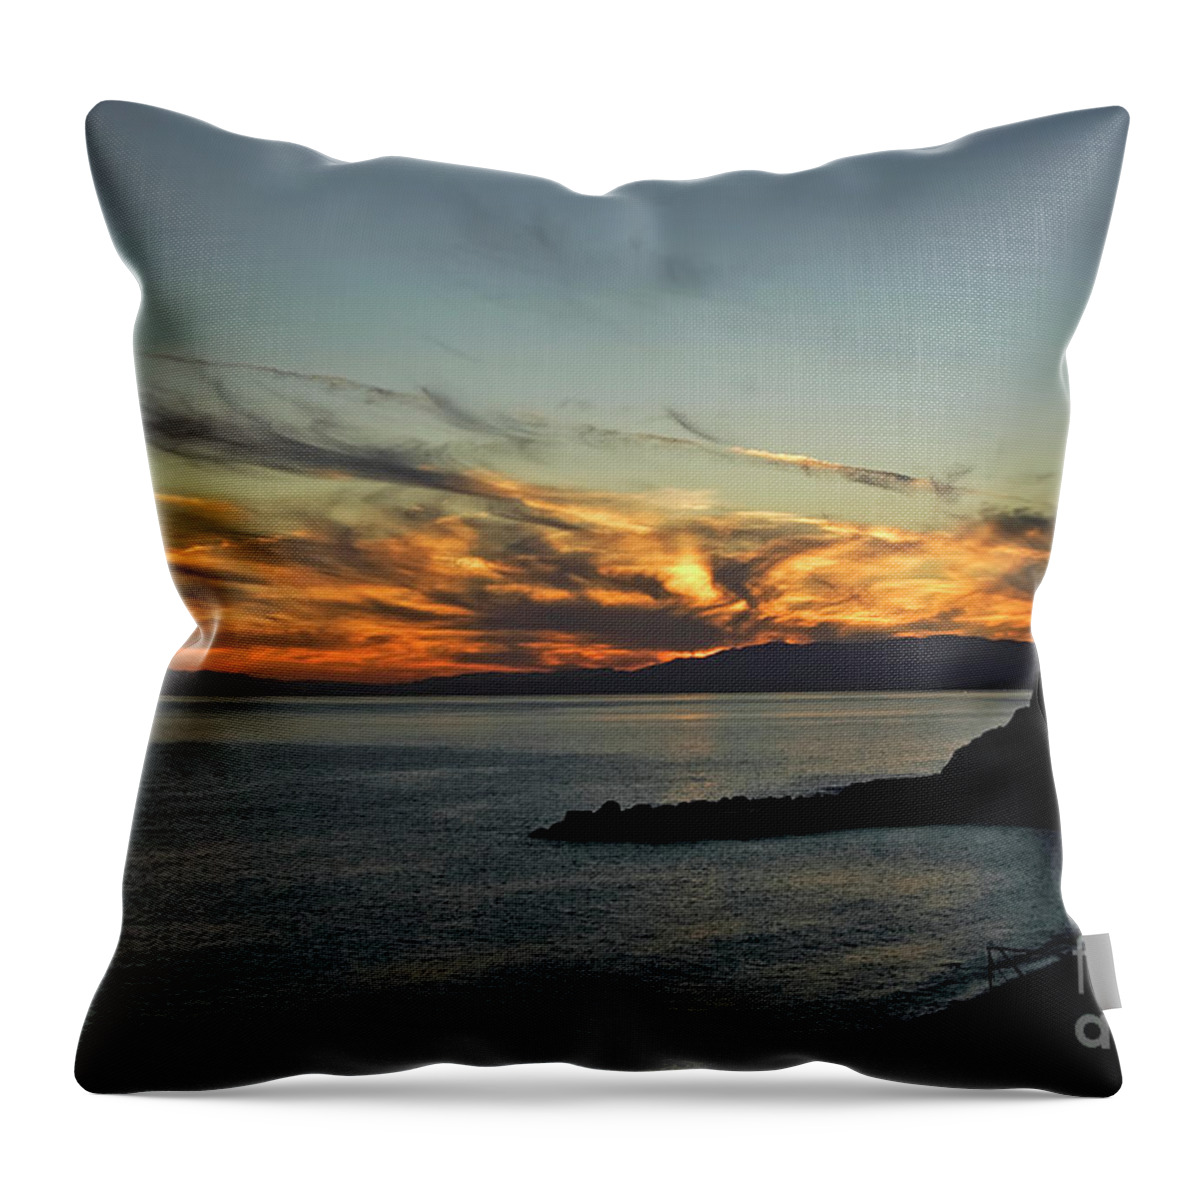 Scenery Throw Pillow featuring the photograph Sunset in Camogli Italy by Paolo Signorini